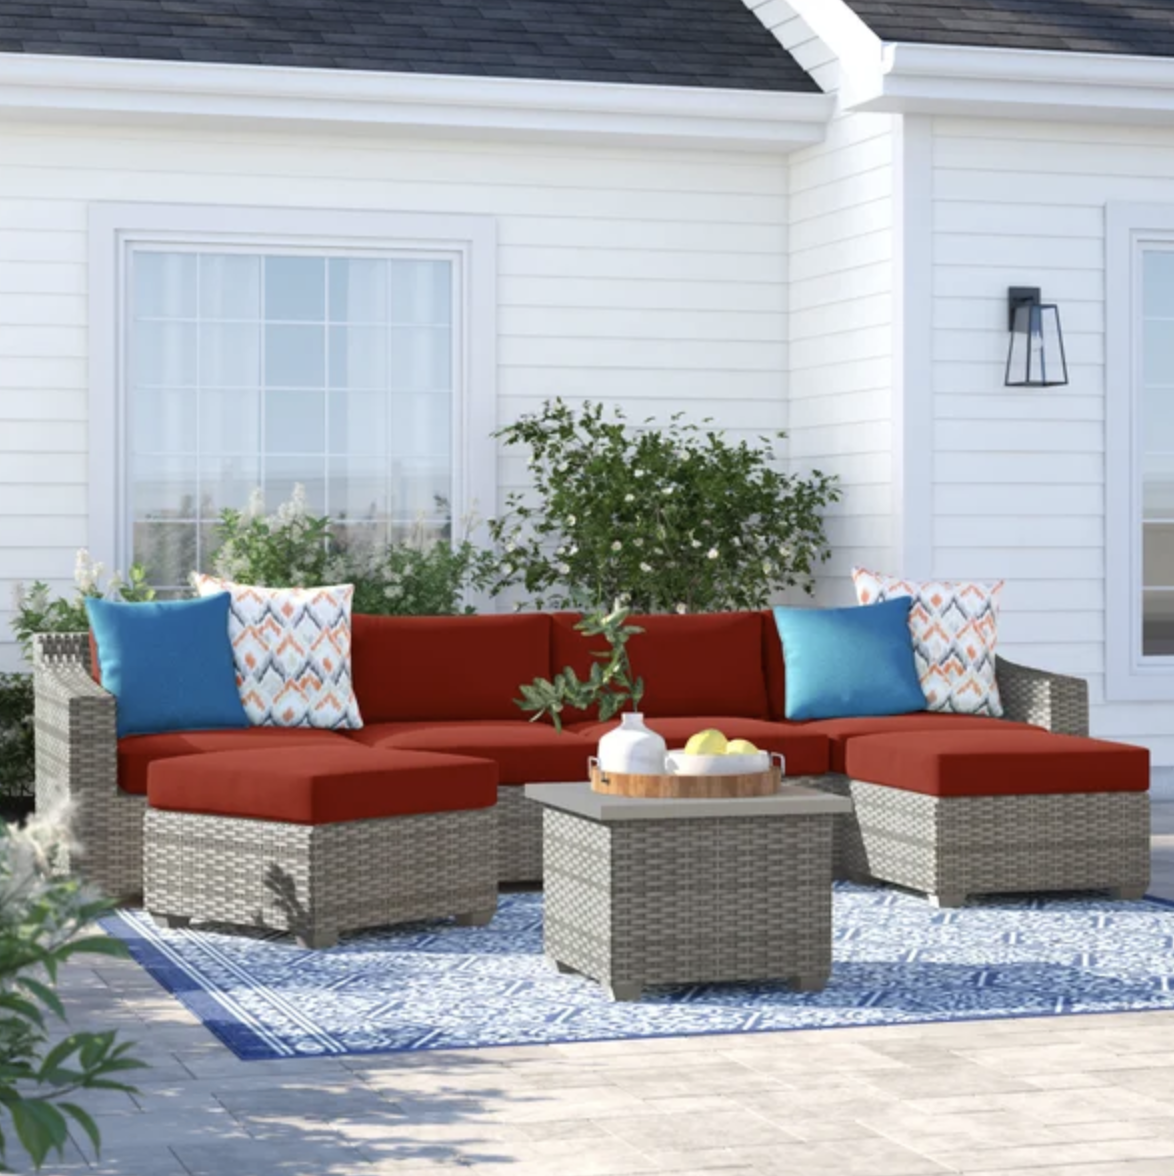 six-person outdoor wicker seating set with terracotta cushions and colorful pillows